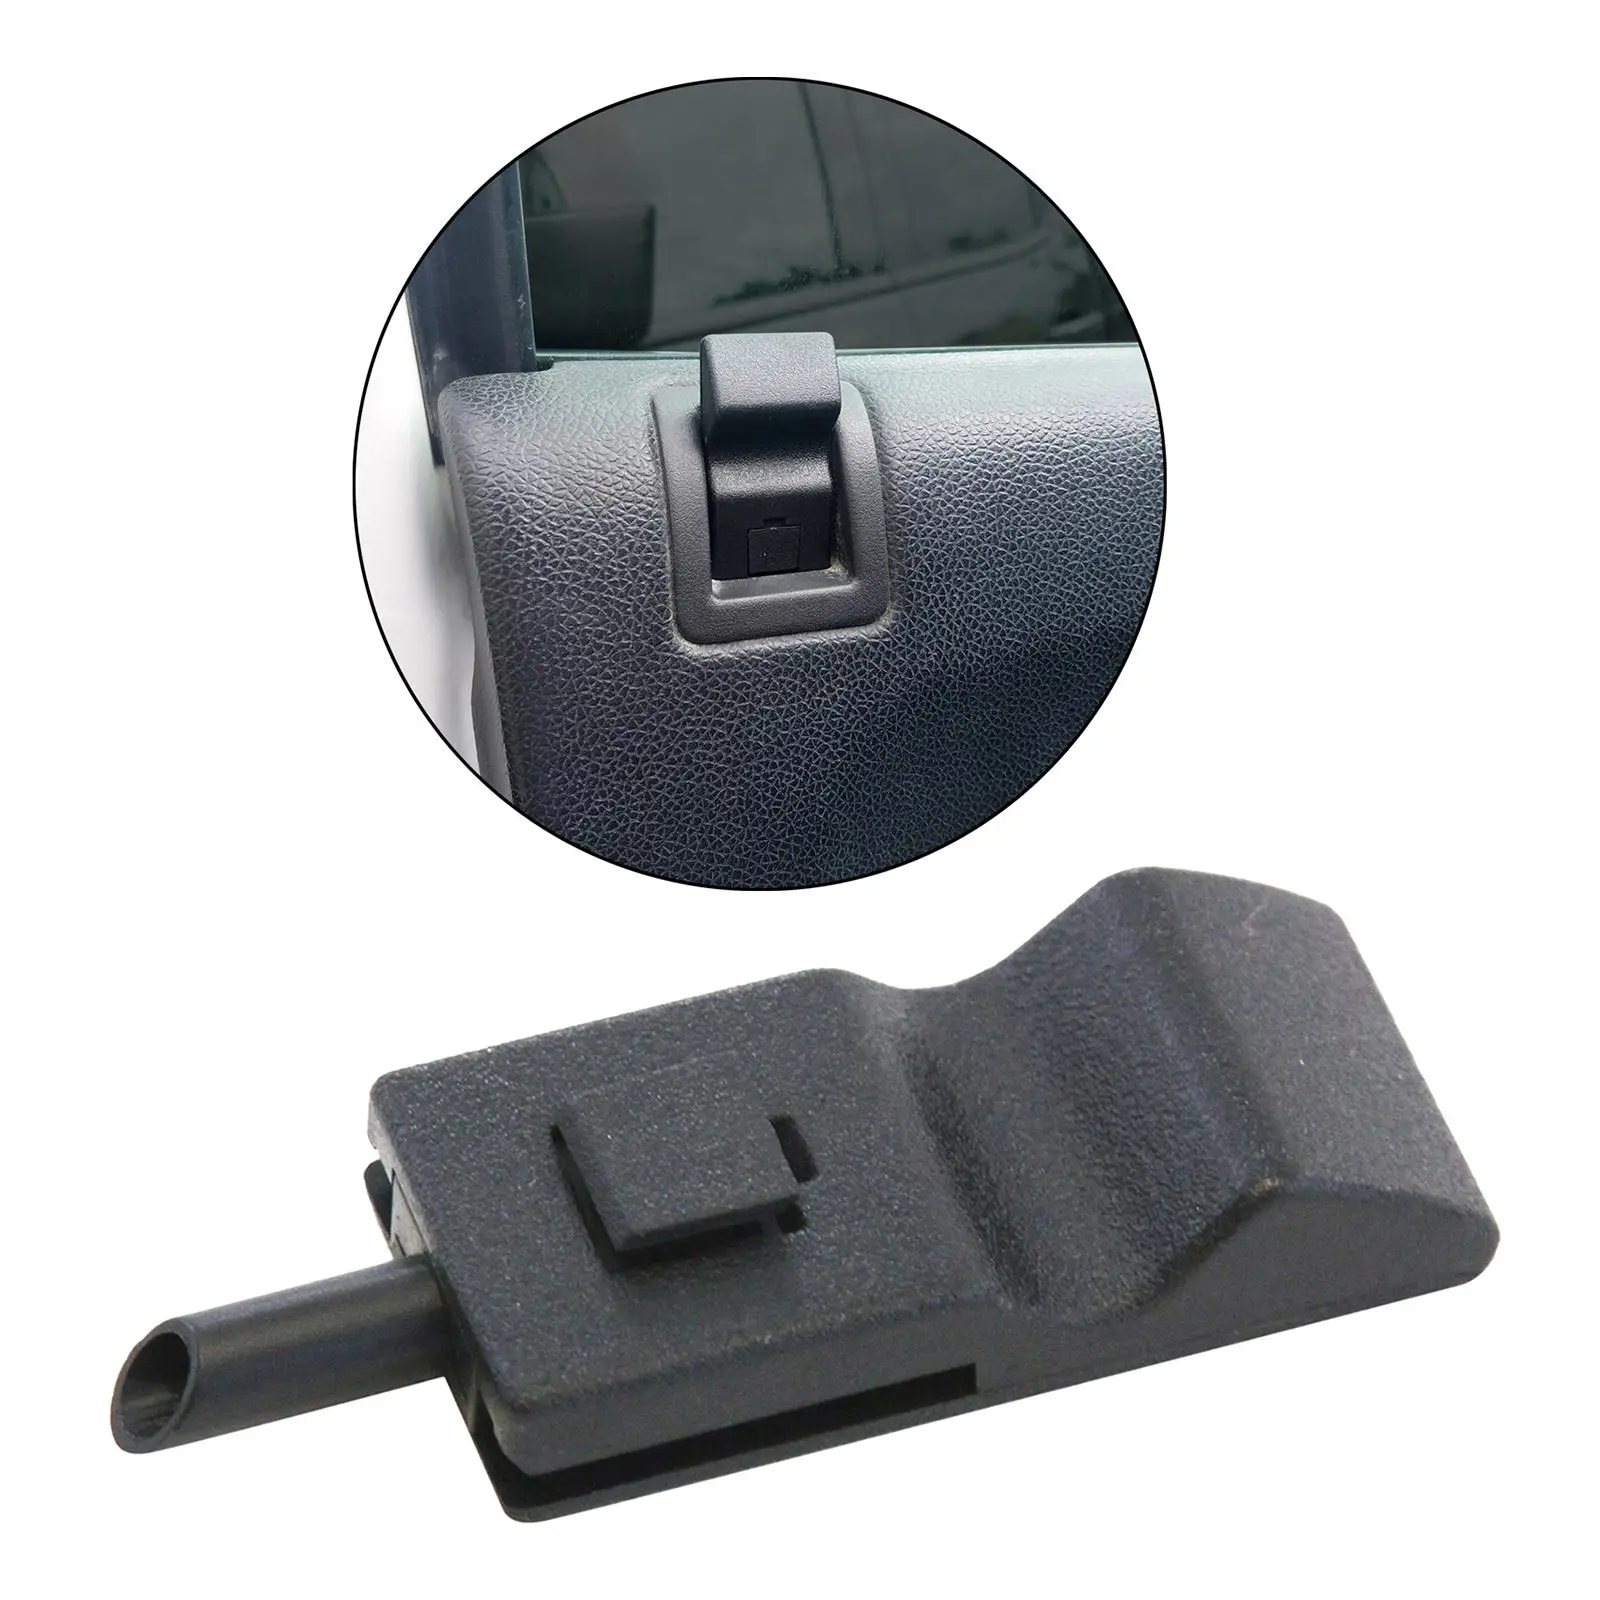 Cars Auto Black Front Door Interior Lock Knob Tab Driver Passenger Parts, Compatible with Chevrolet 2007 - 2013 Accessory, New